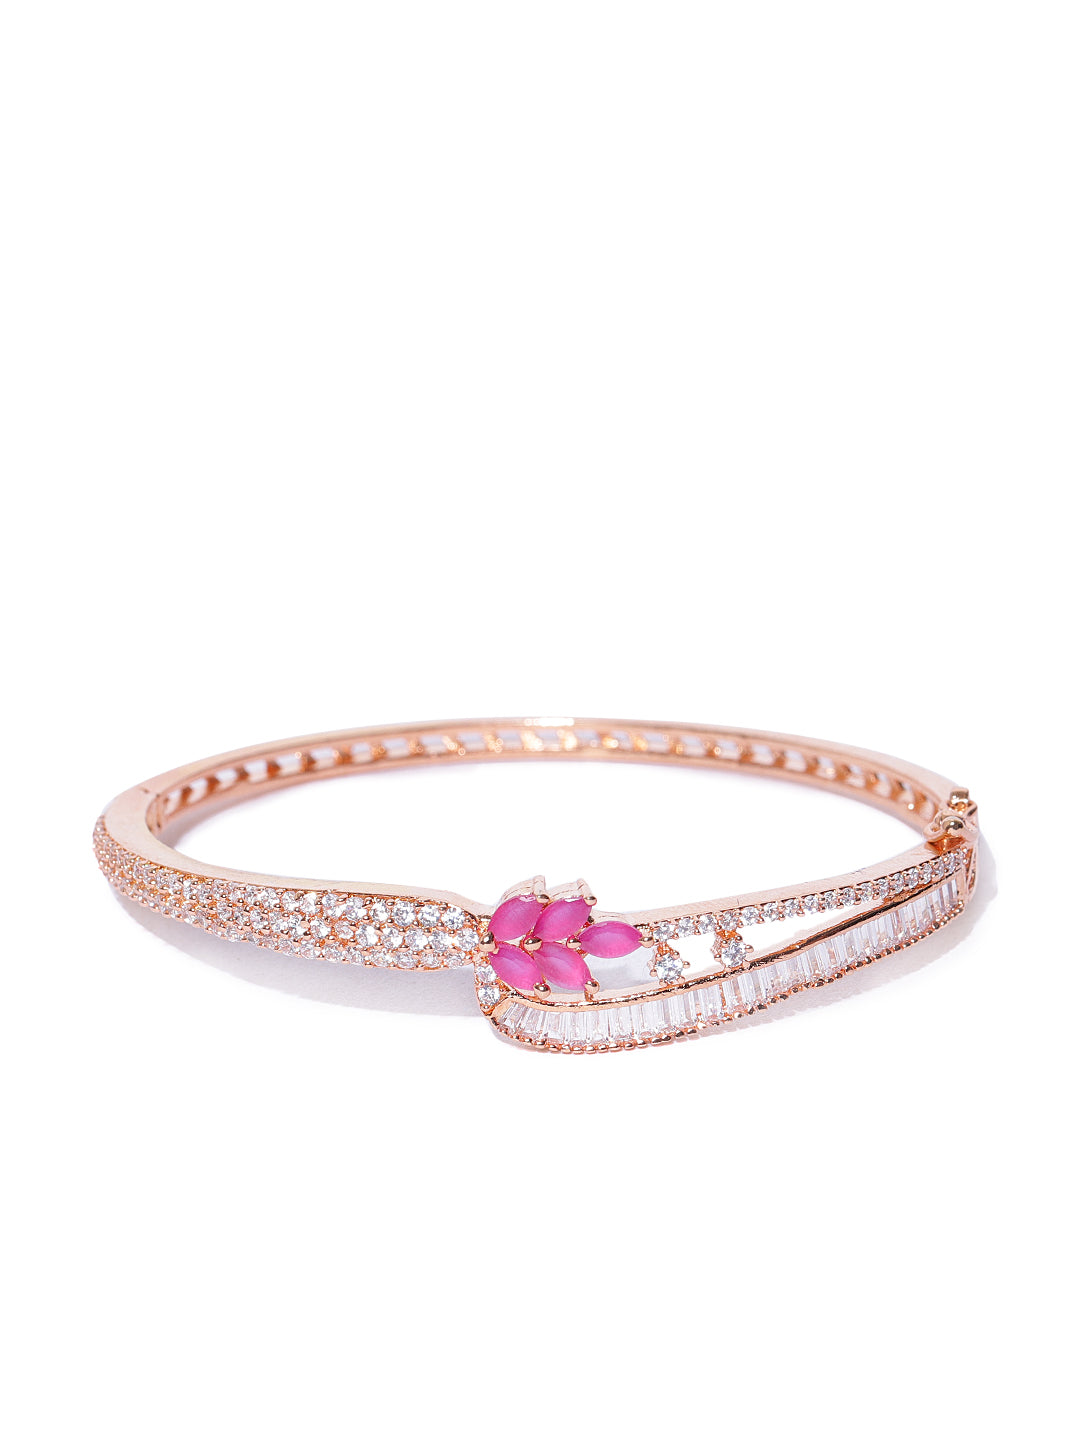 Rose Gold-Plated Ruby and American Diamond Studded Bracelet in Floral Pattern